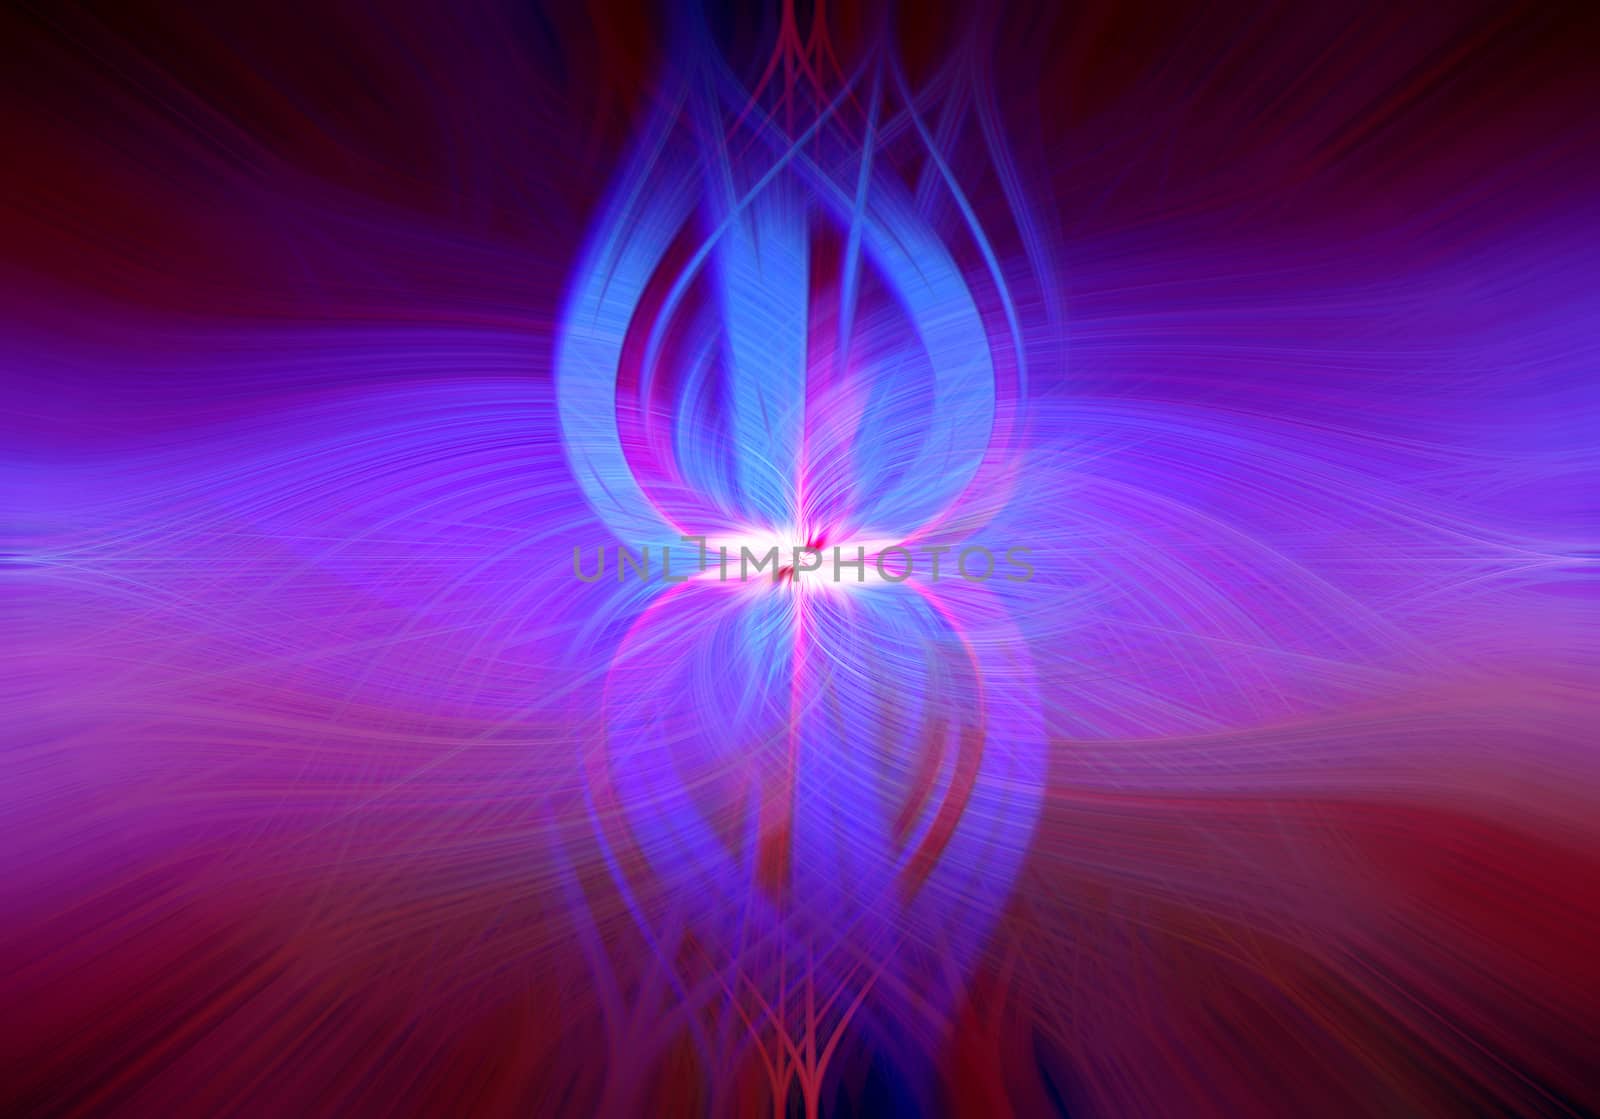 Beautiful abstract intertwined 3d fibers forming a shape of sparkle, flame, flower, interlinked hearts. Pink, blue, maroon, and purple colors. Illustration.